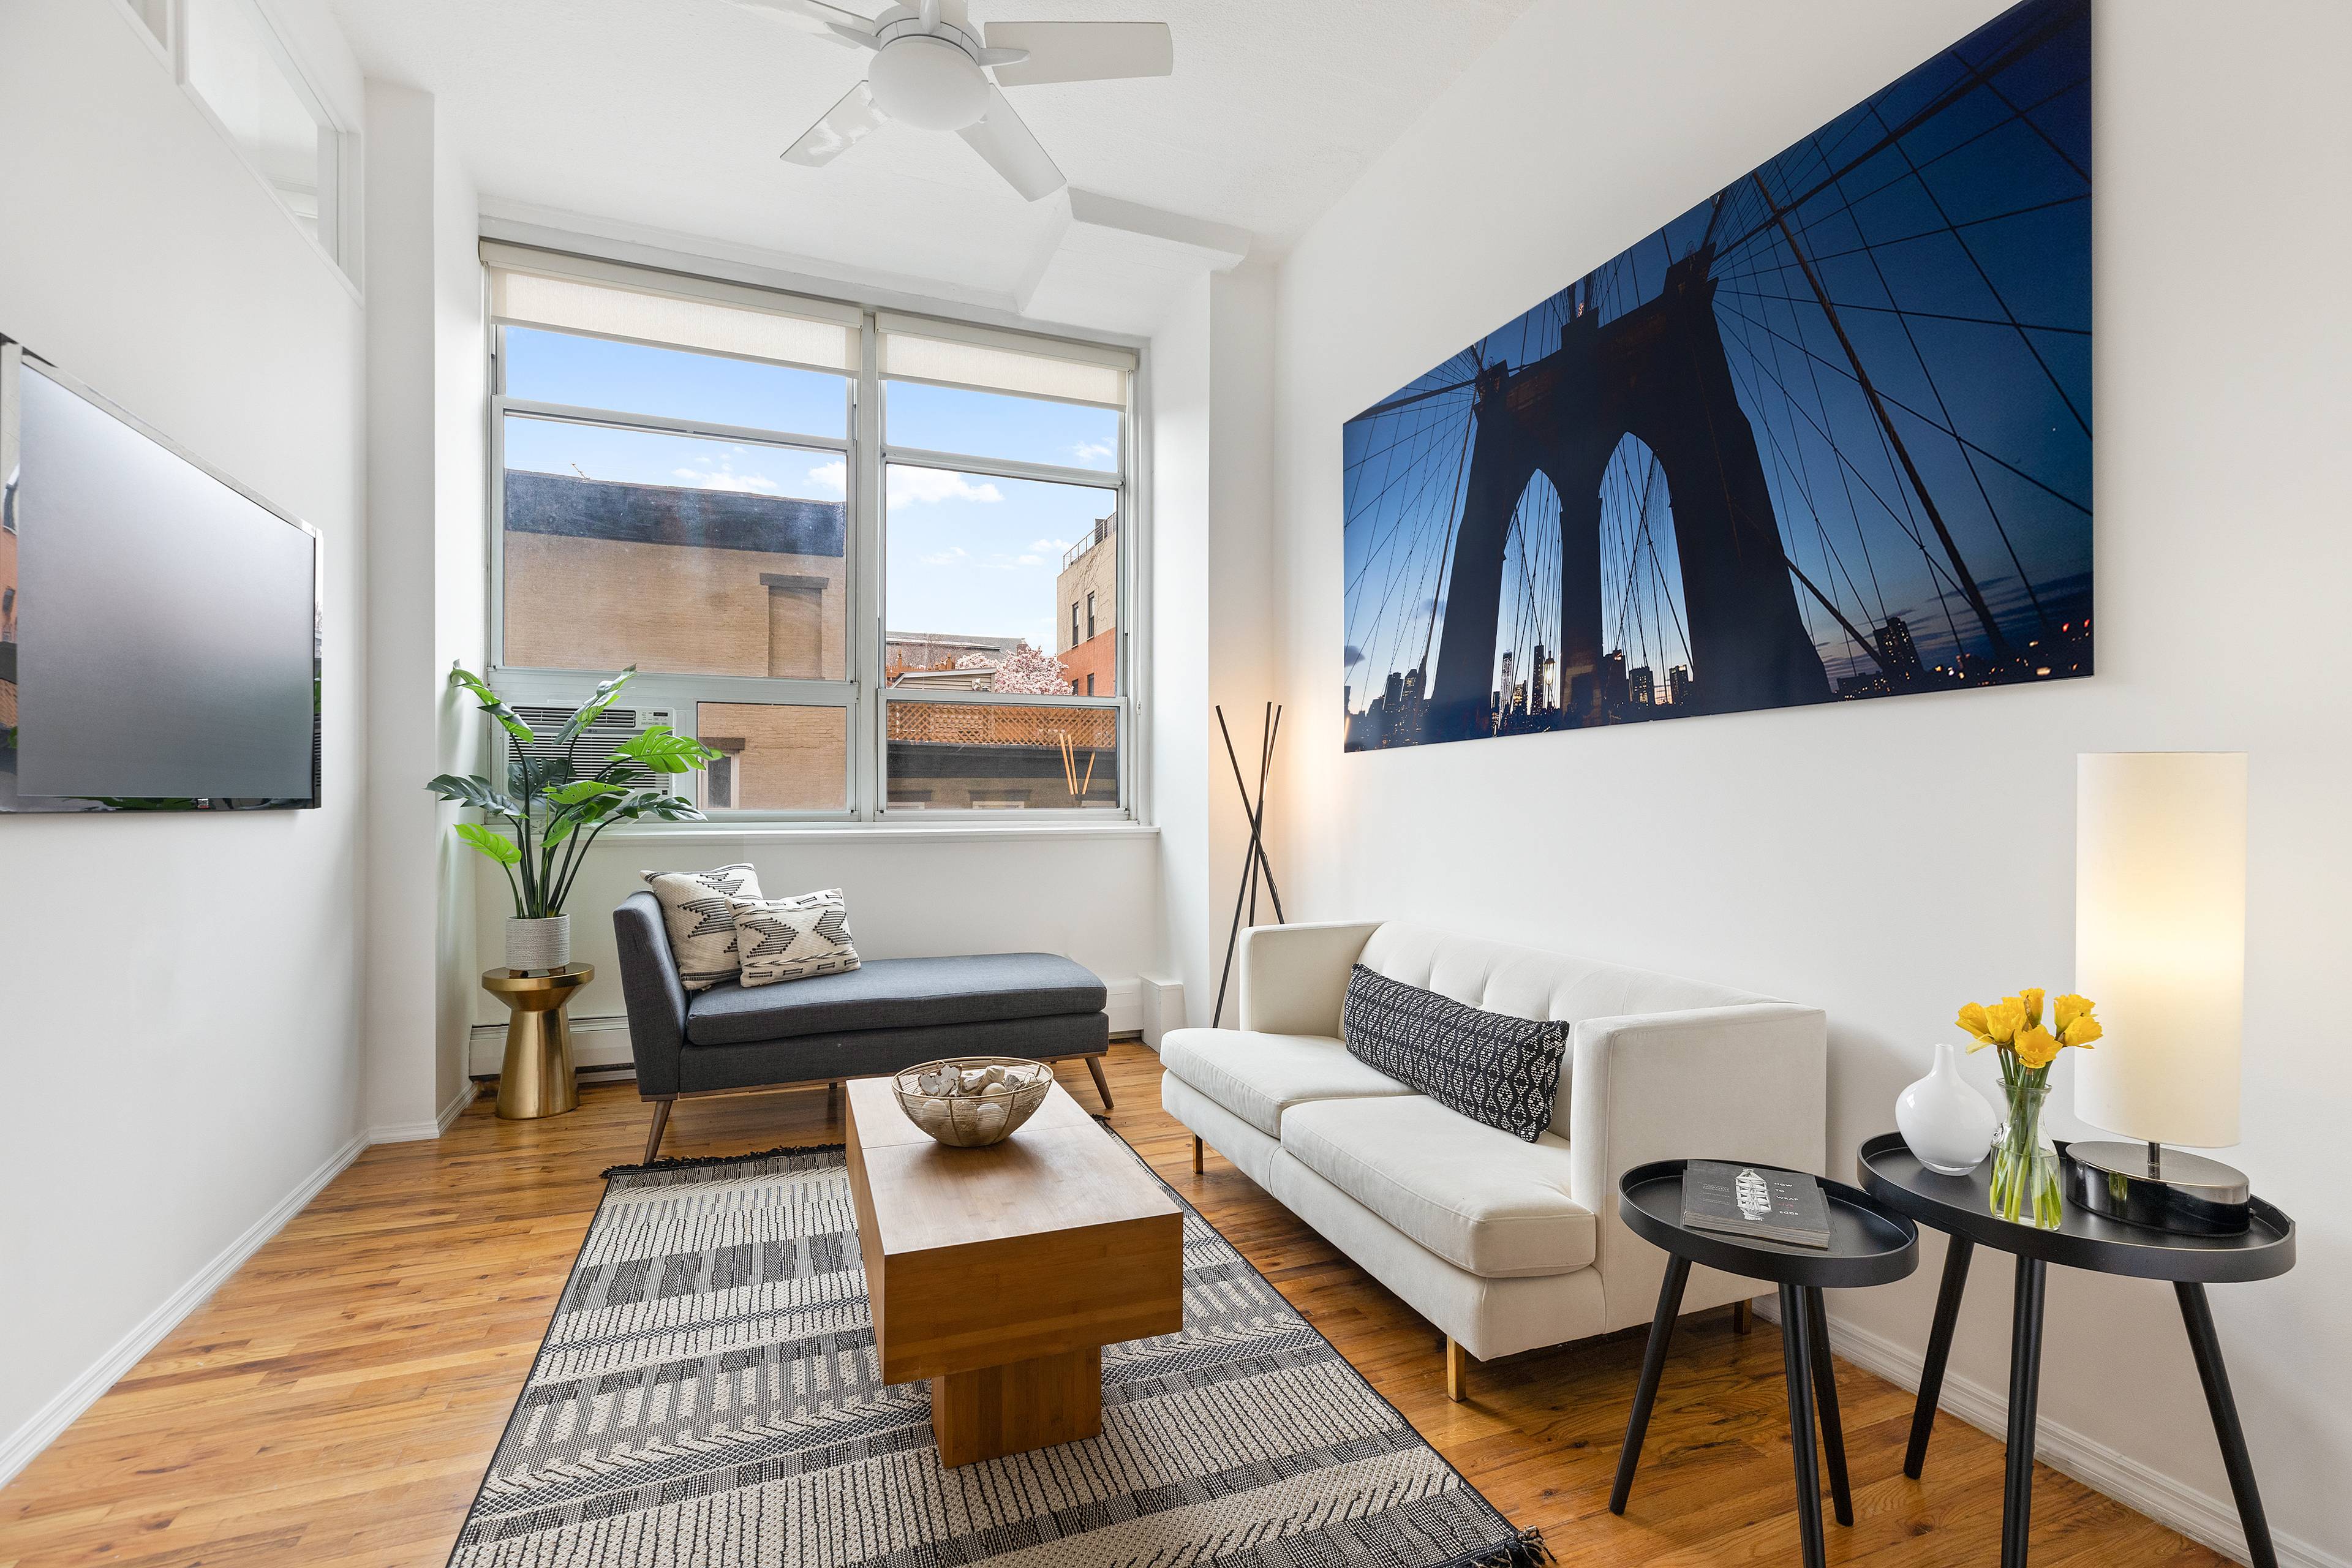 Step in, exhale, welcome to Court Street Lofts the exemplar of Carroll Gardens condo living.